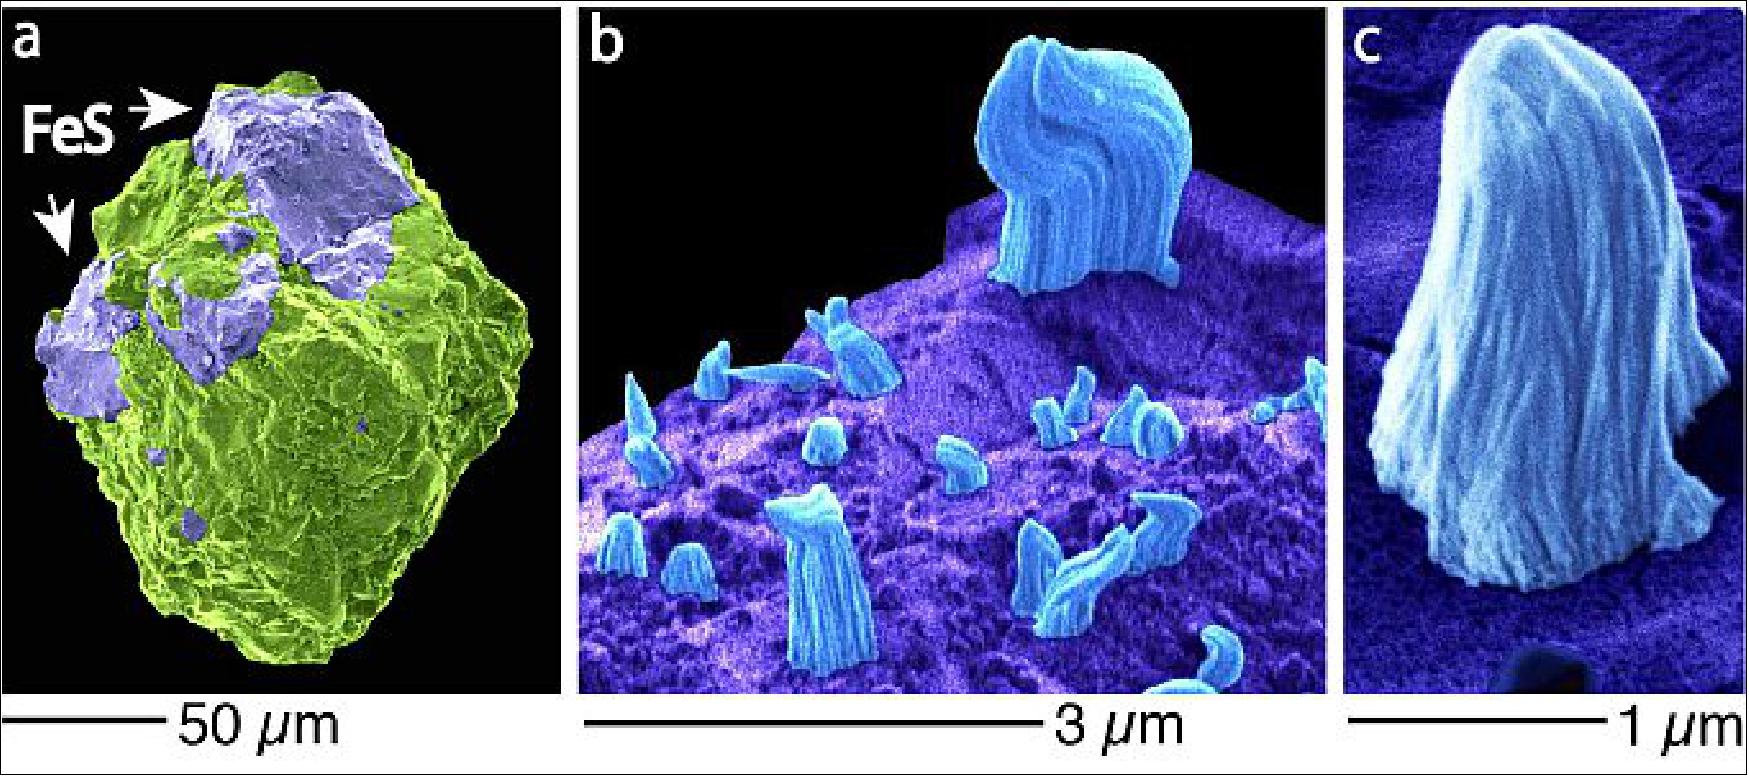 Figure 29: Microscopic images in false colors. (a) One of investigated Itokawa grain. The mineral troilite (FeS, violet) is surrounded by silicate minerals (green). (b) Troilite surface (violet) with iron whiskers (blue). (c) An enlarged image of an iron whisker (image credit: Toru Matsumoto)